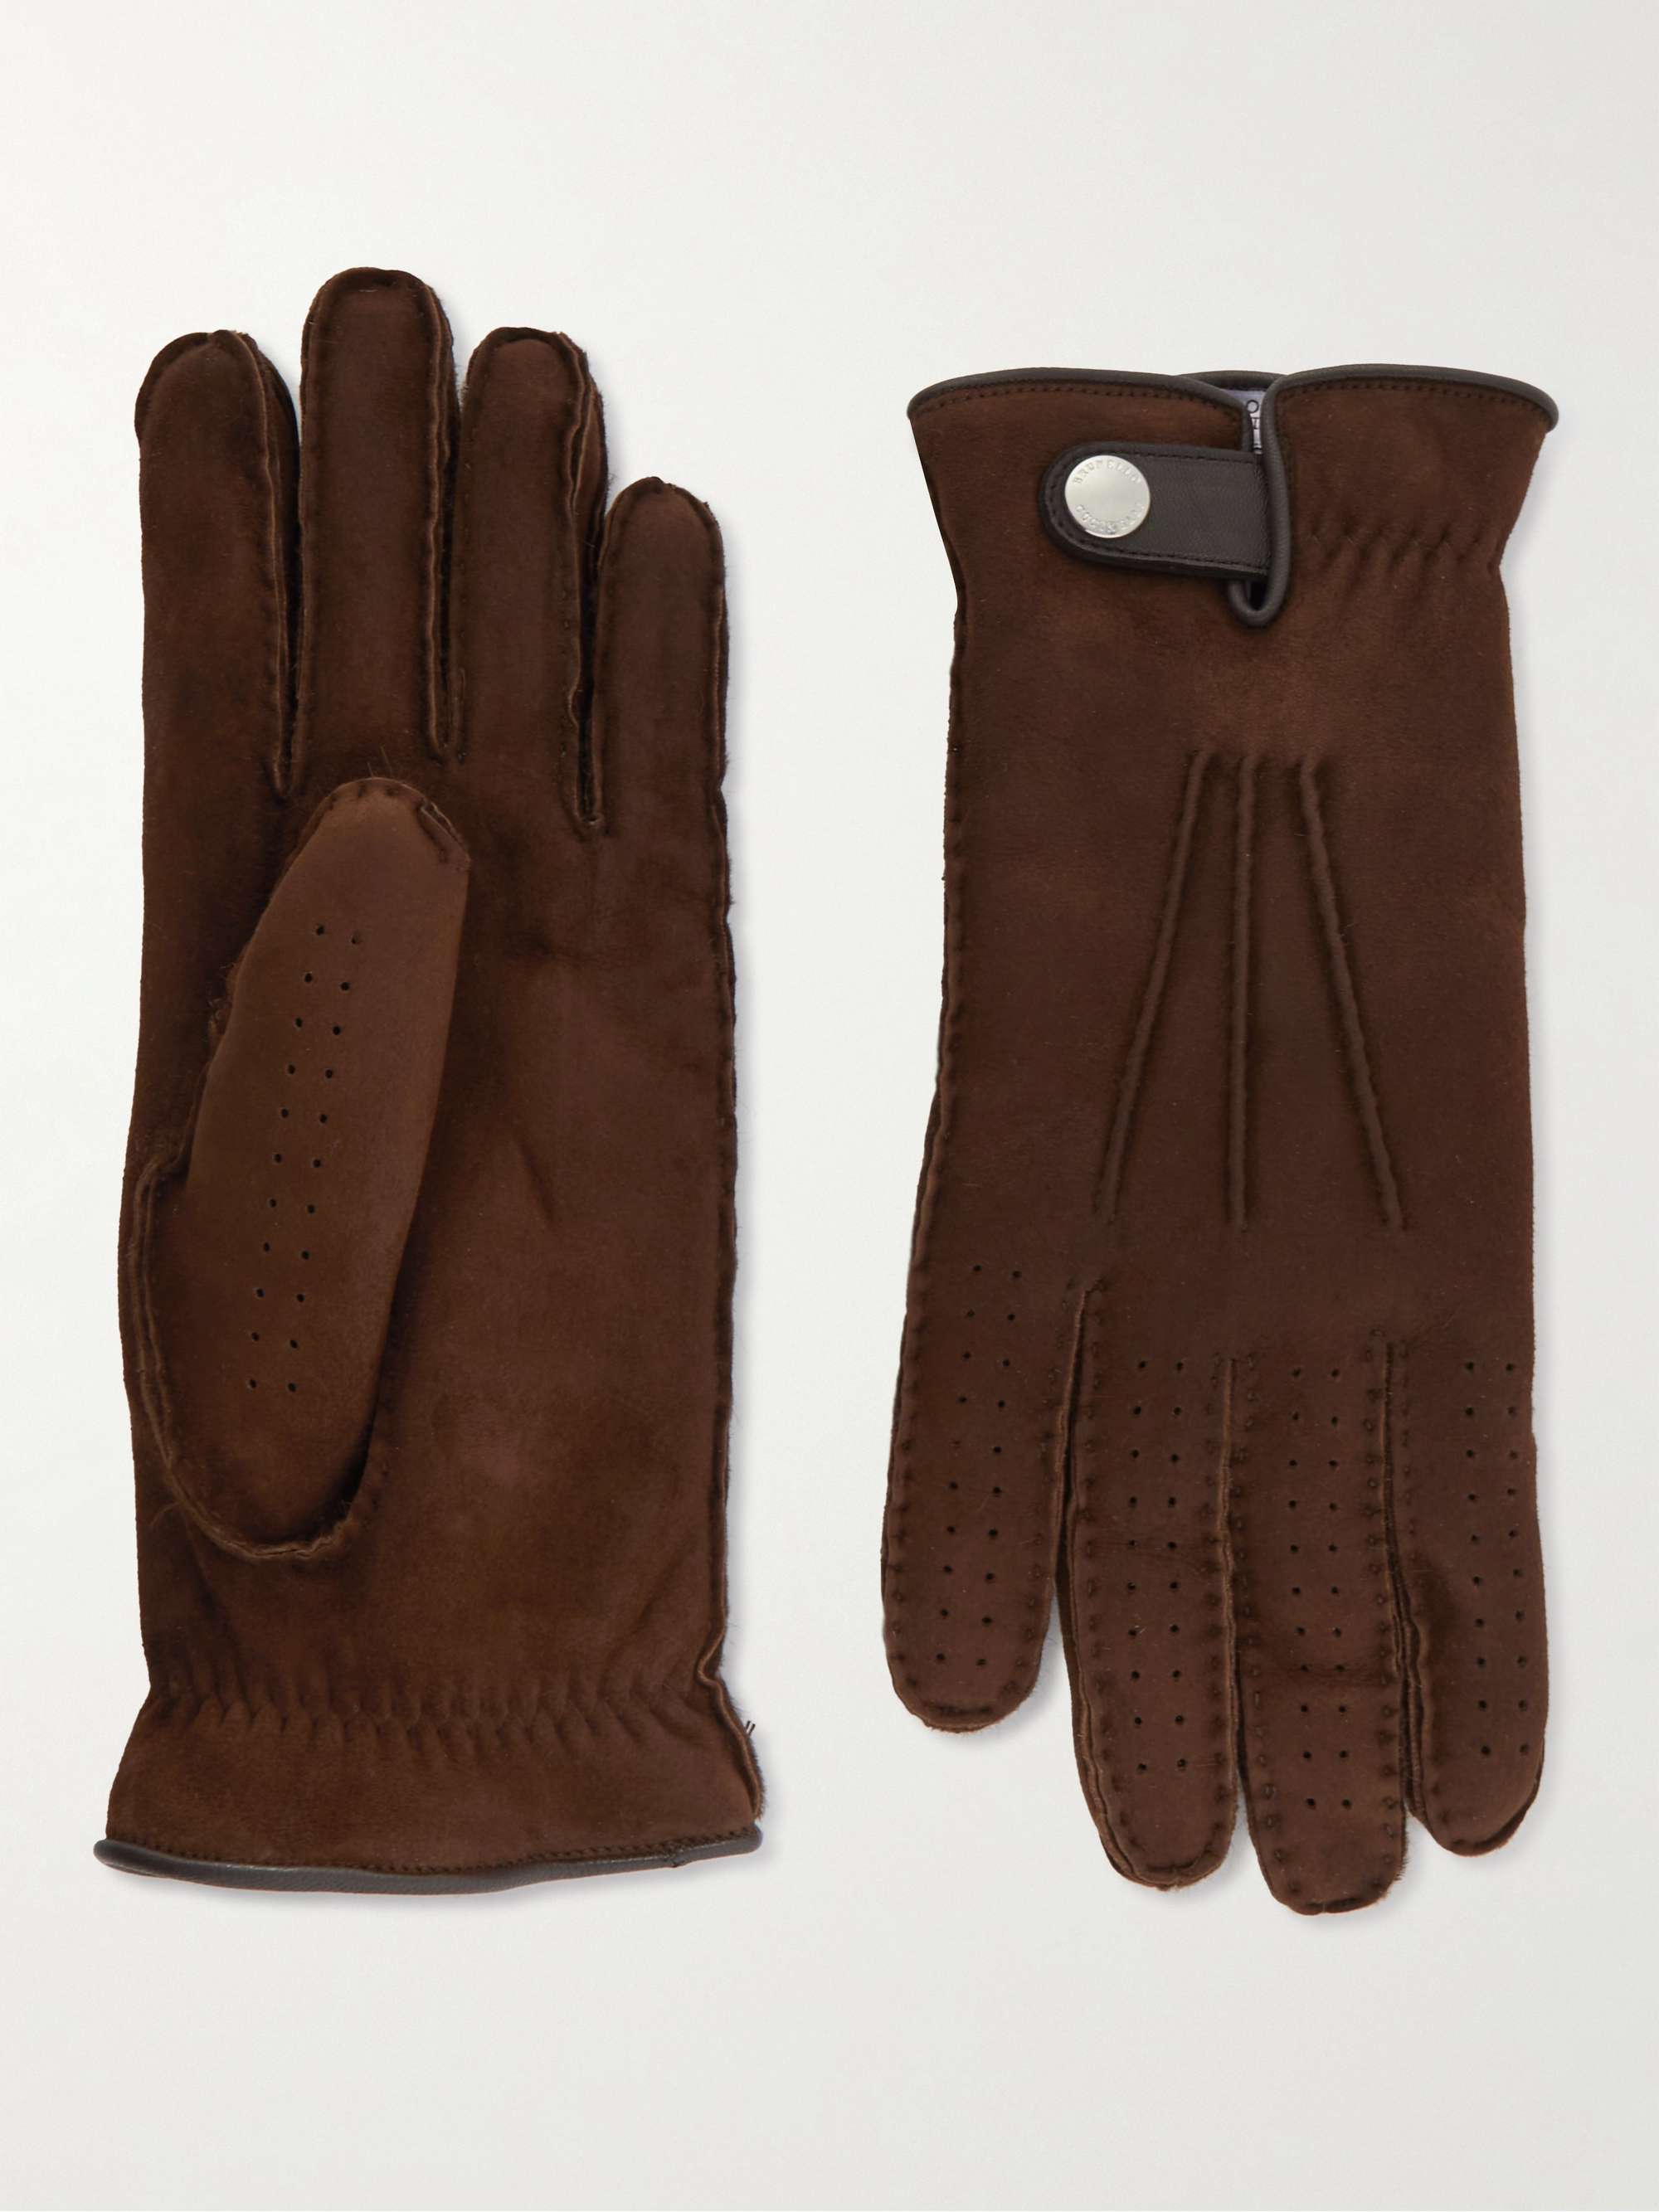 BRUNELLO CUCINELLI Suede Shearling-Lined Gloves